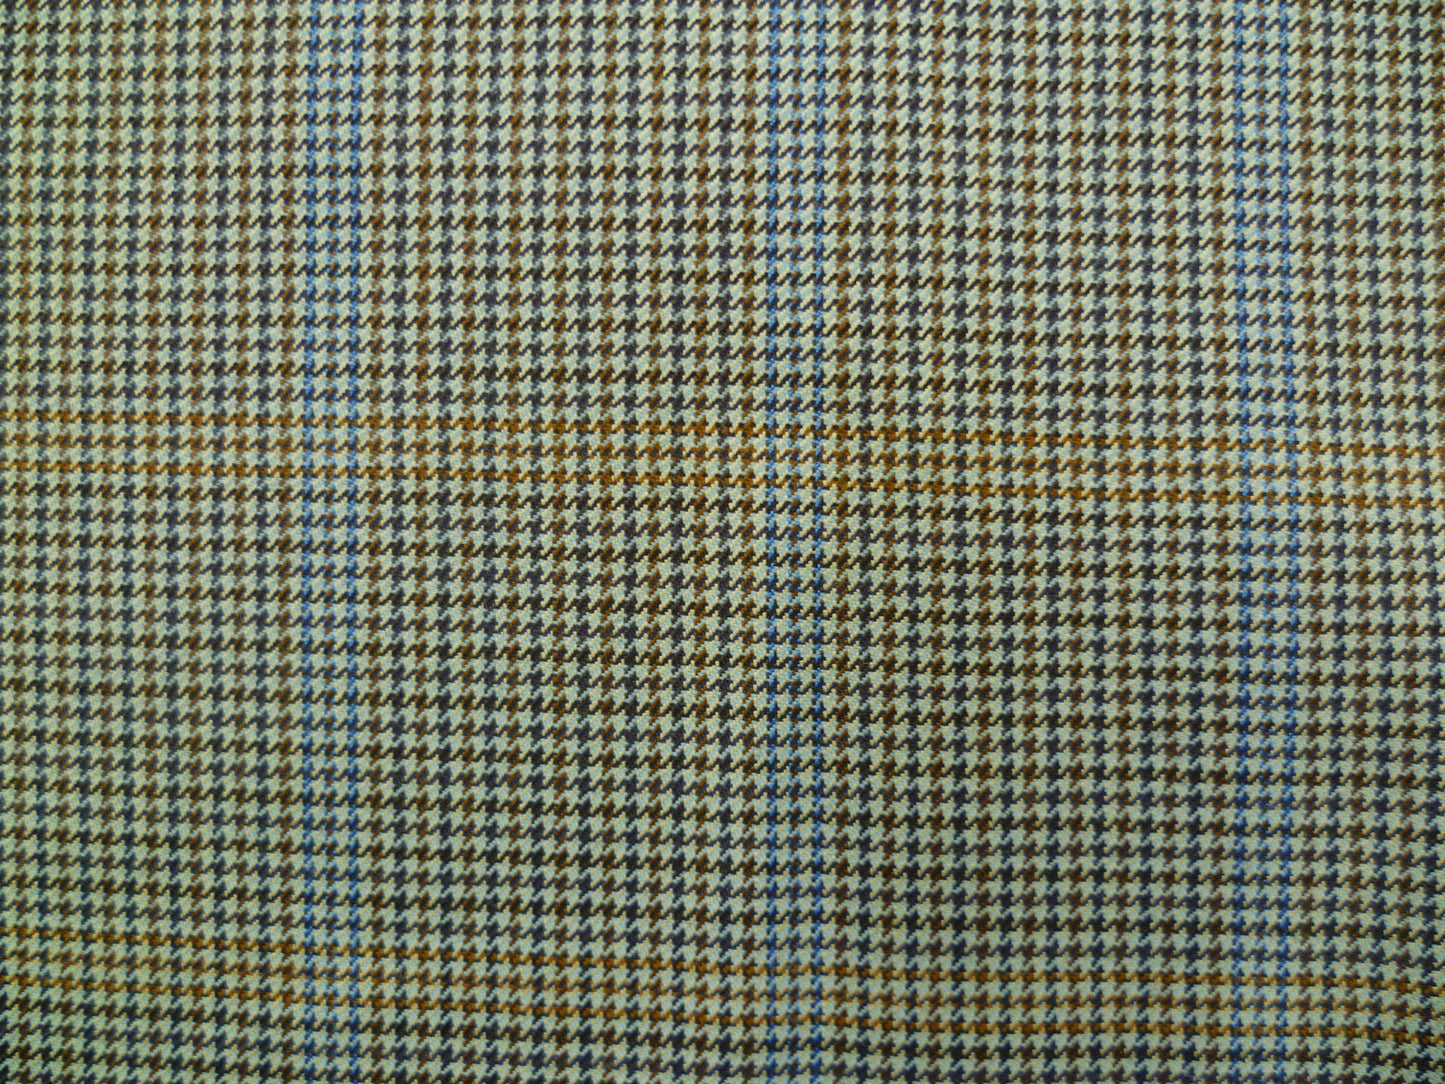 Mixed Blue, Beige, Brown Dogstooths and Blue Overchecked Wool